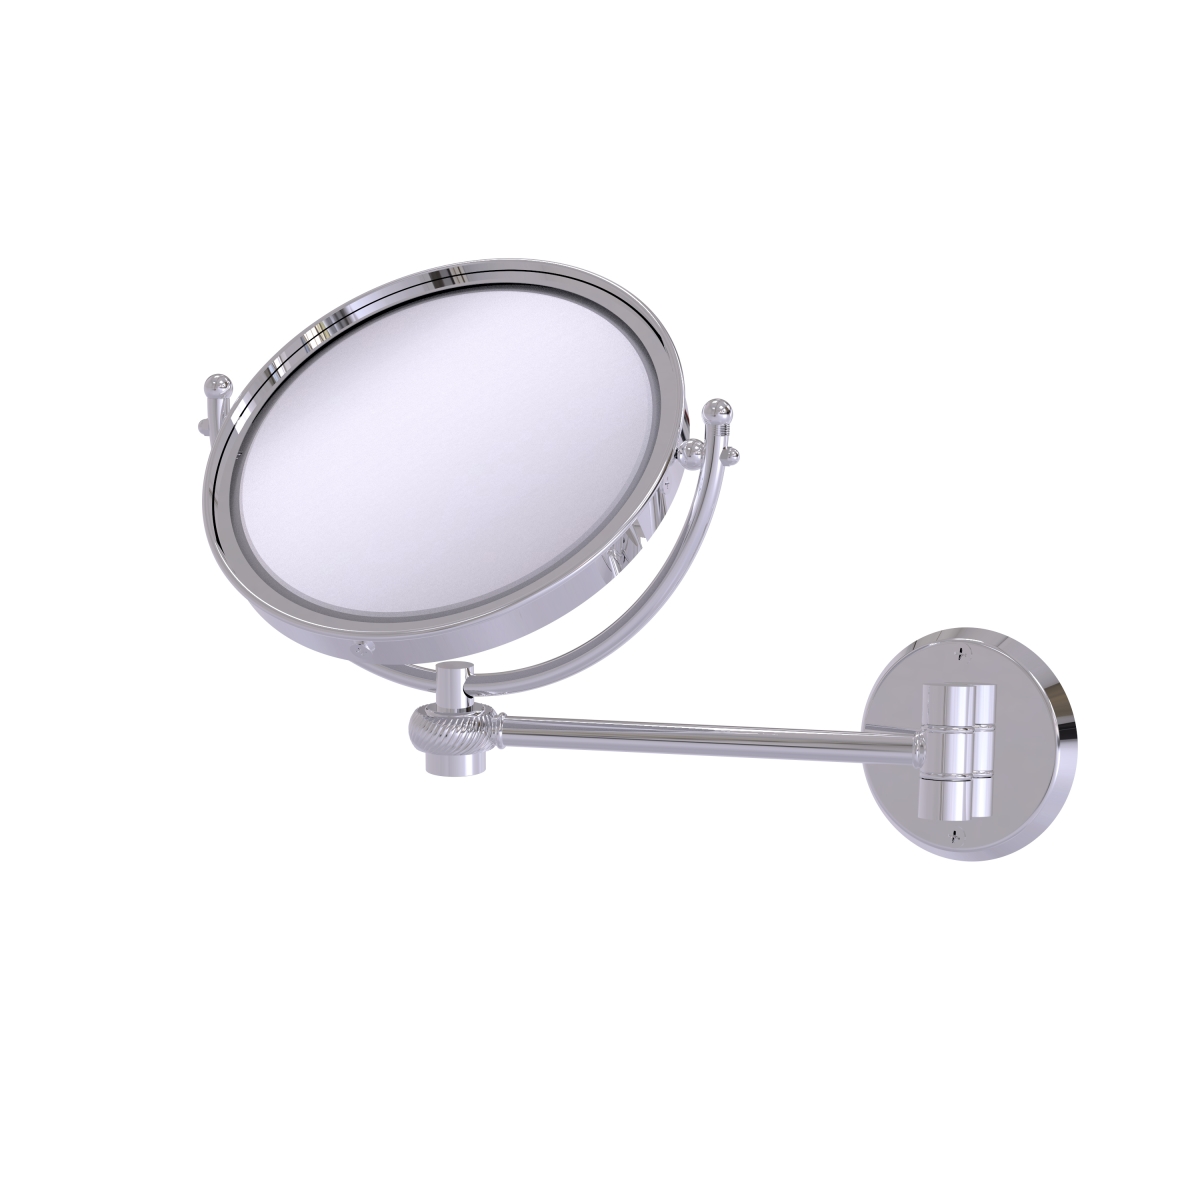 WM-5T-2X-PC 8 in. Wall Mounted Make-Up Mirror 2X Magnification, Polished Chrome - 10 x 8 x 11 in -  Allied Brass, WM-5T/2X-PC